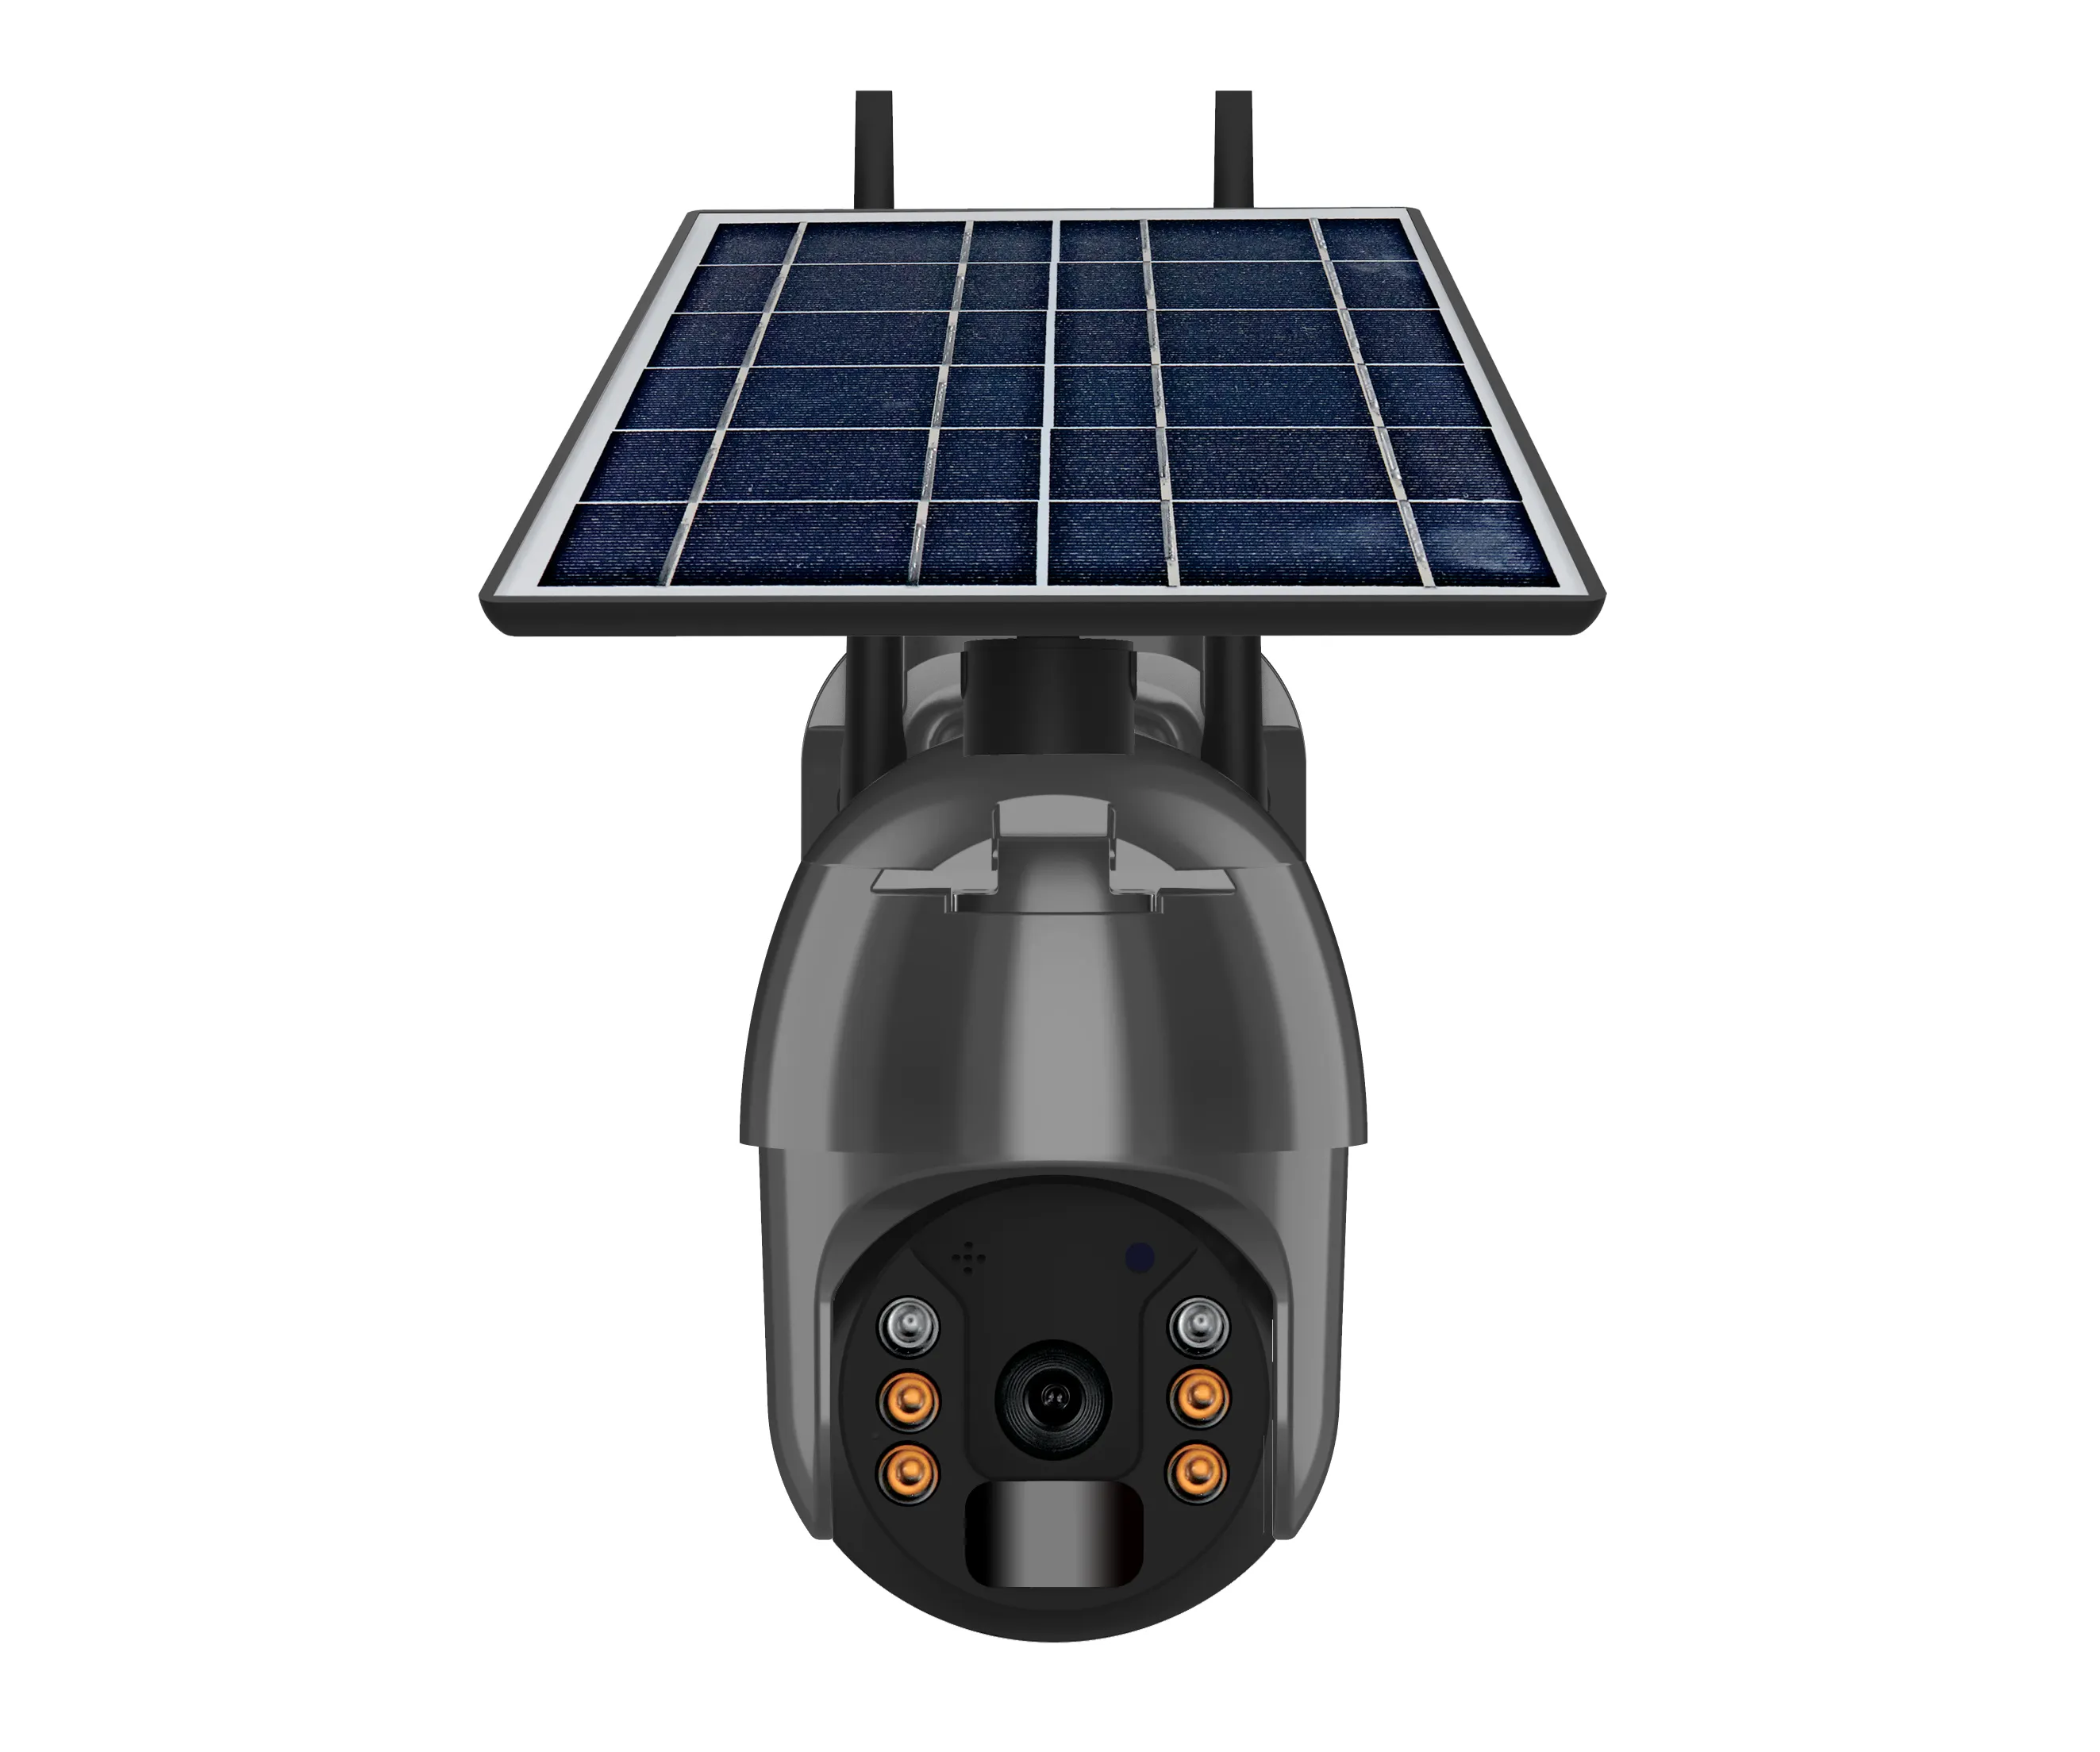 Smart Mirrorless Solar Camera Outdoor Wireless Ptz Poe Network Cameras Security Camera With Ethernet Connection Ip Address